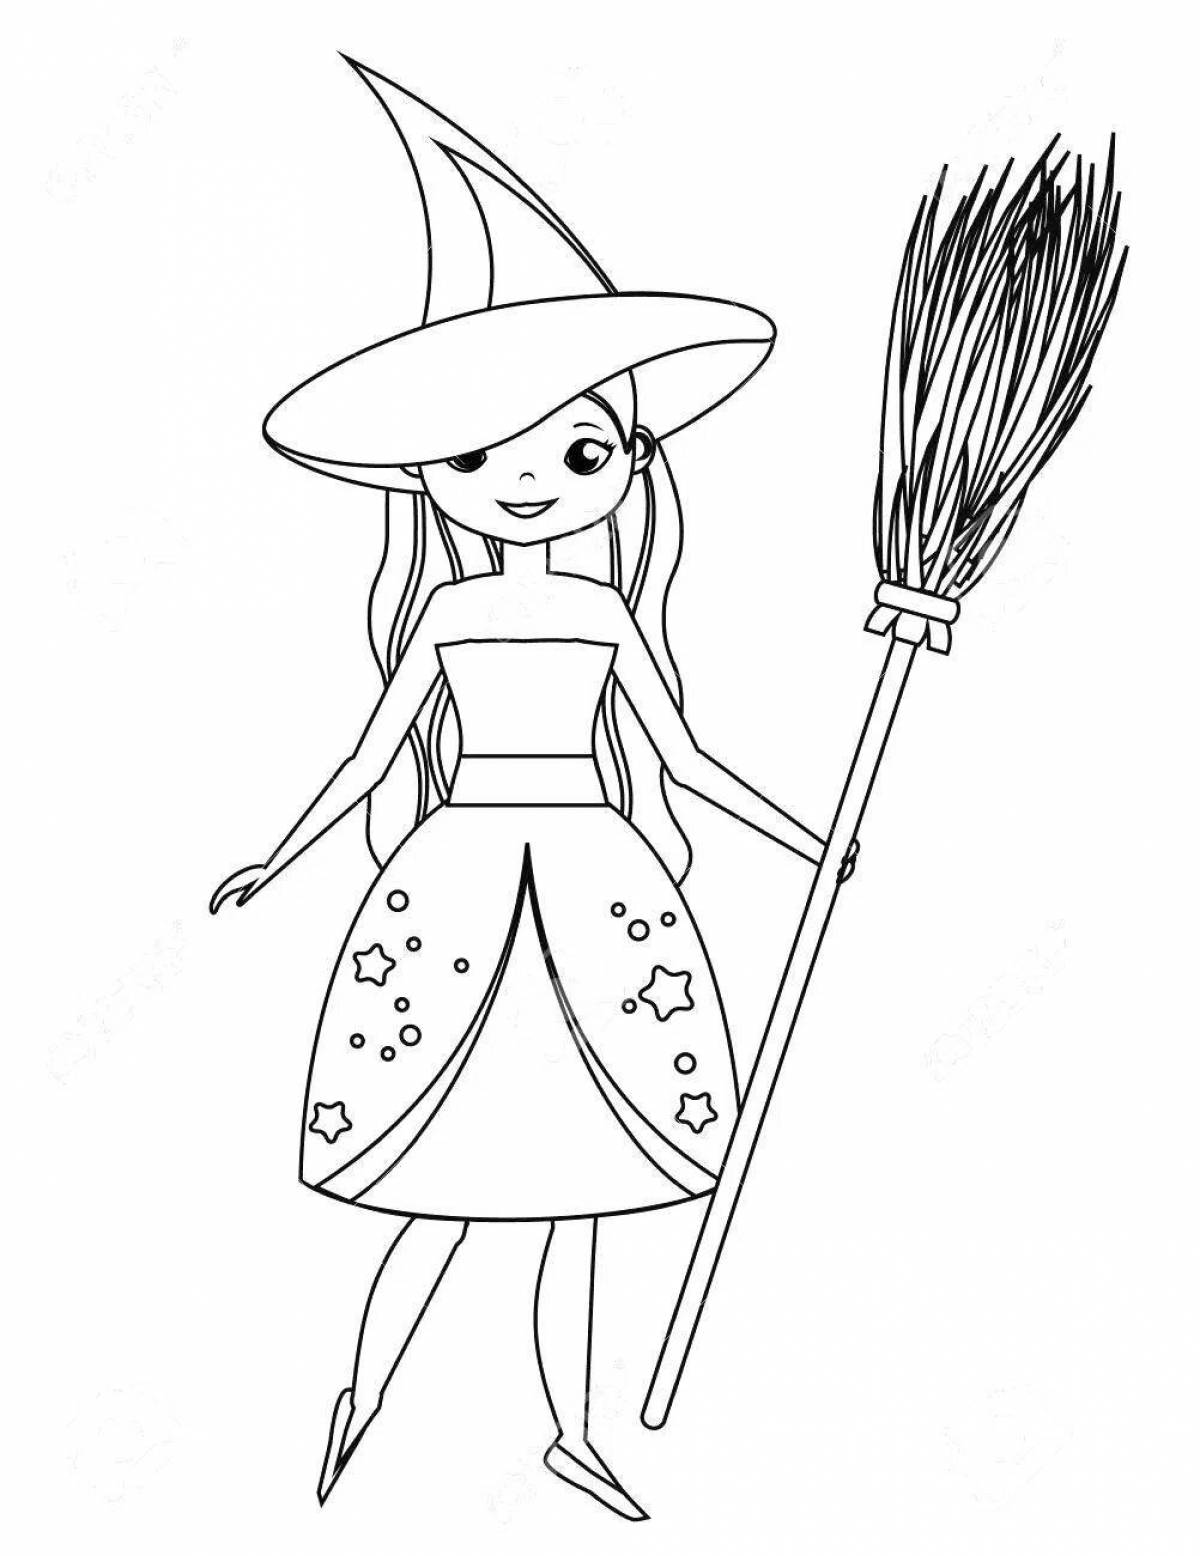 Fun coloring book aya and witch